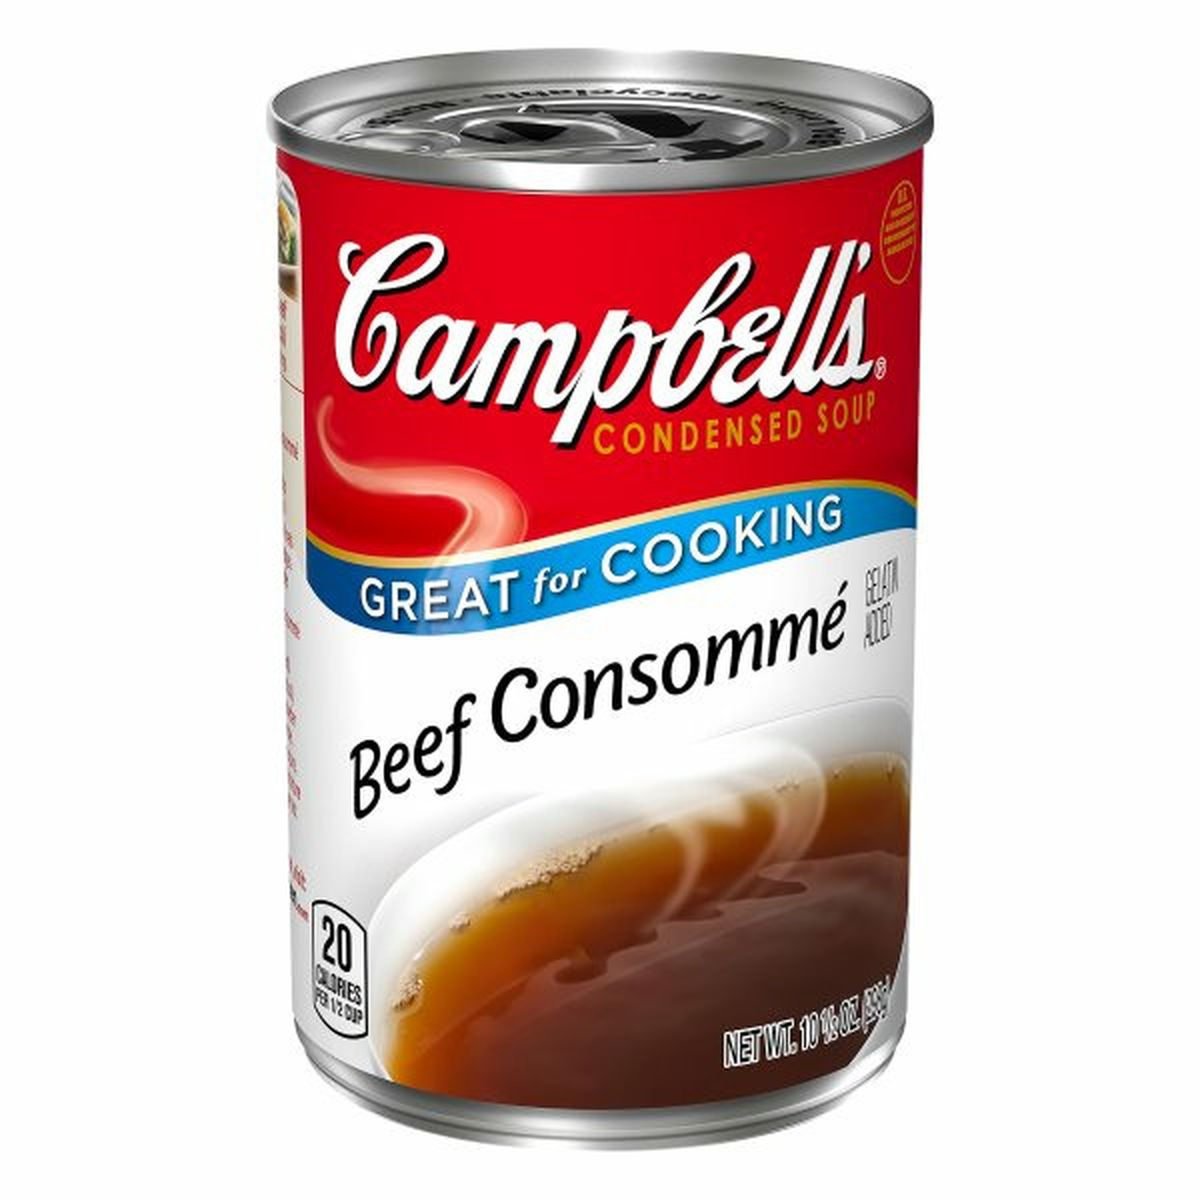 Calories in Campbell'ss Soup, Beef Consomme, Condensed